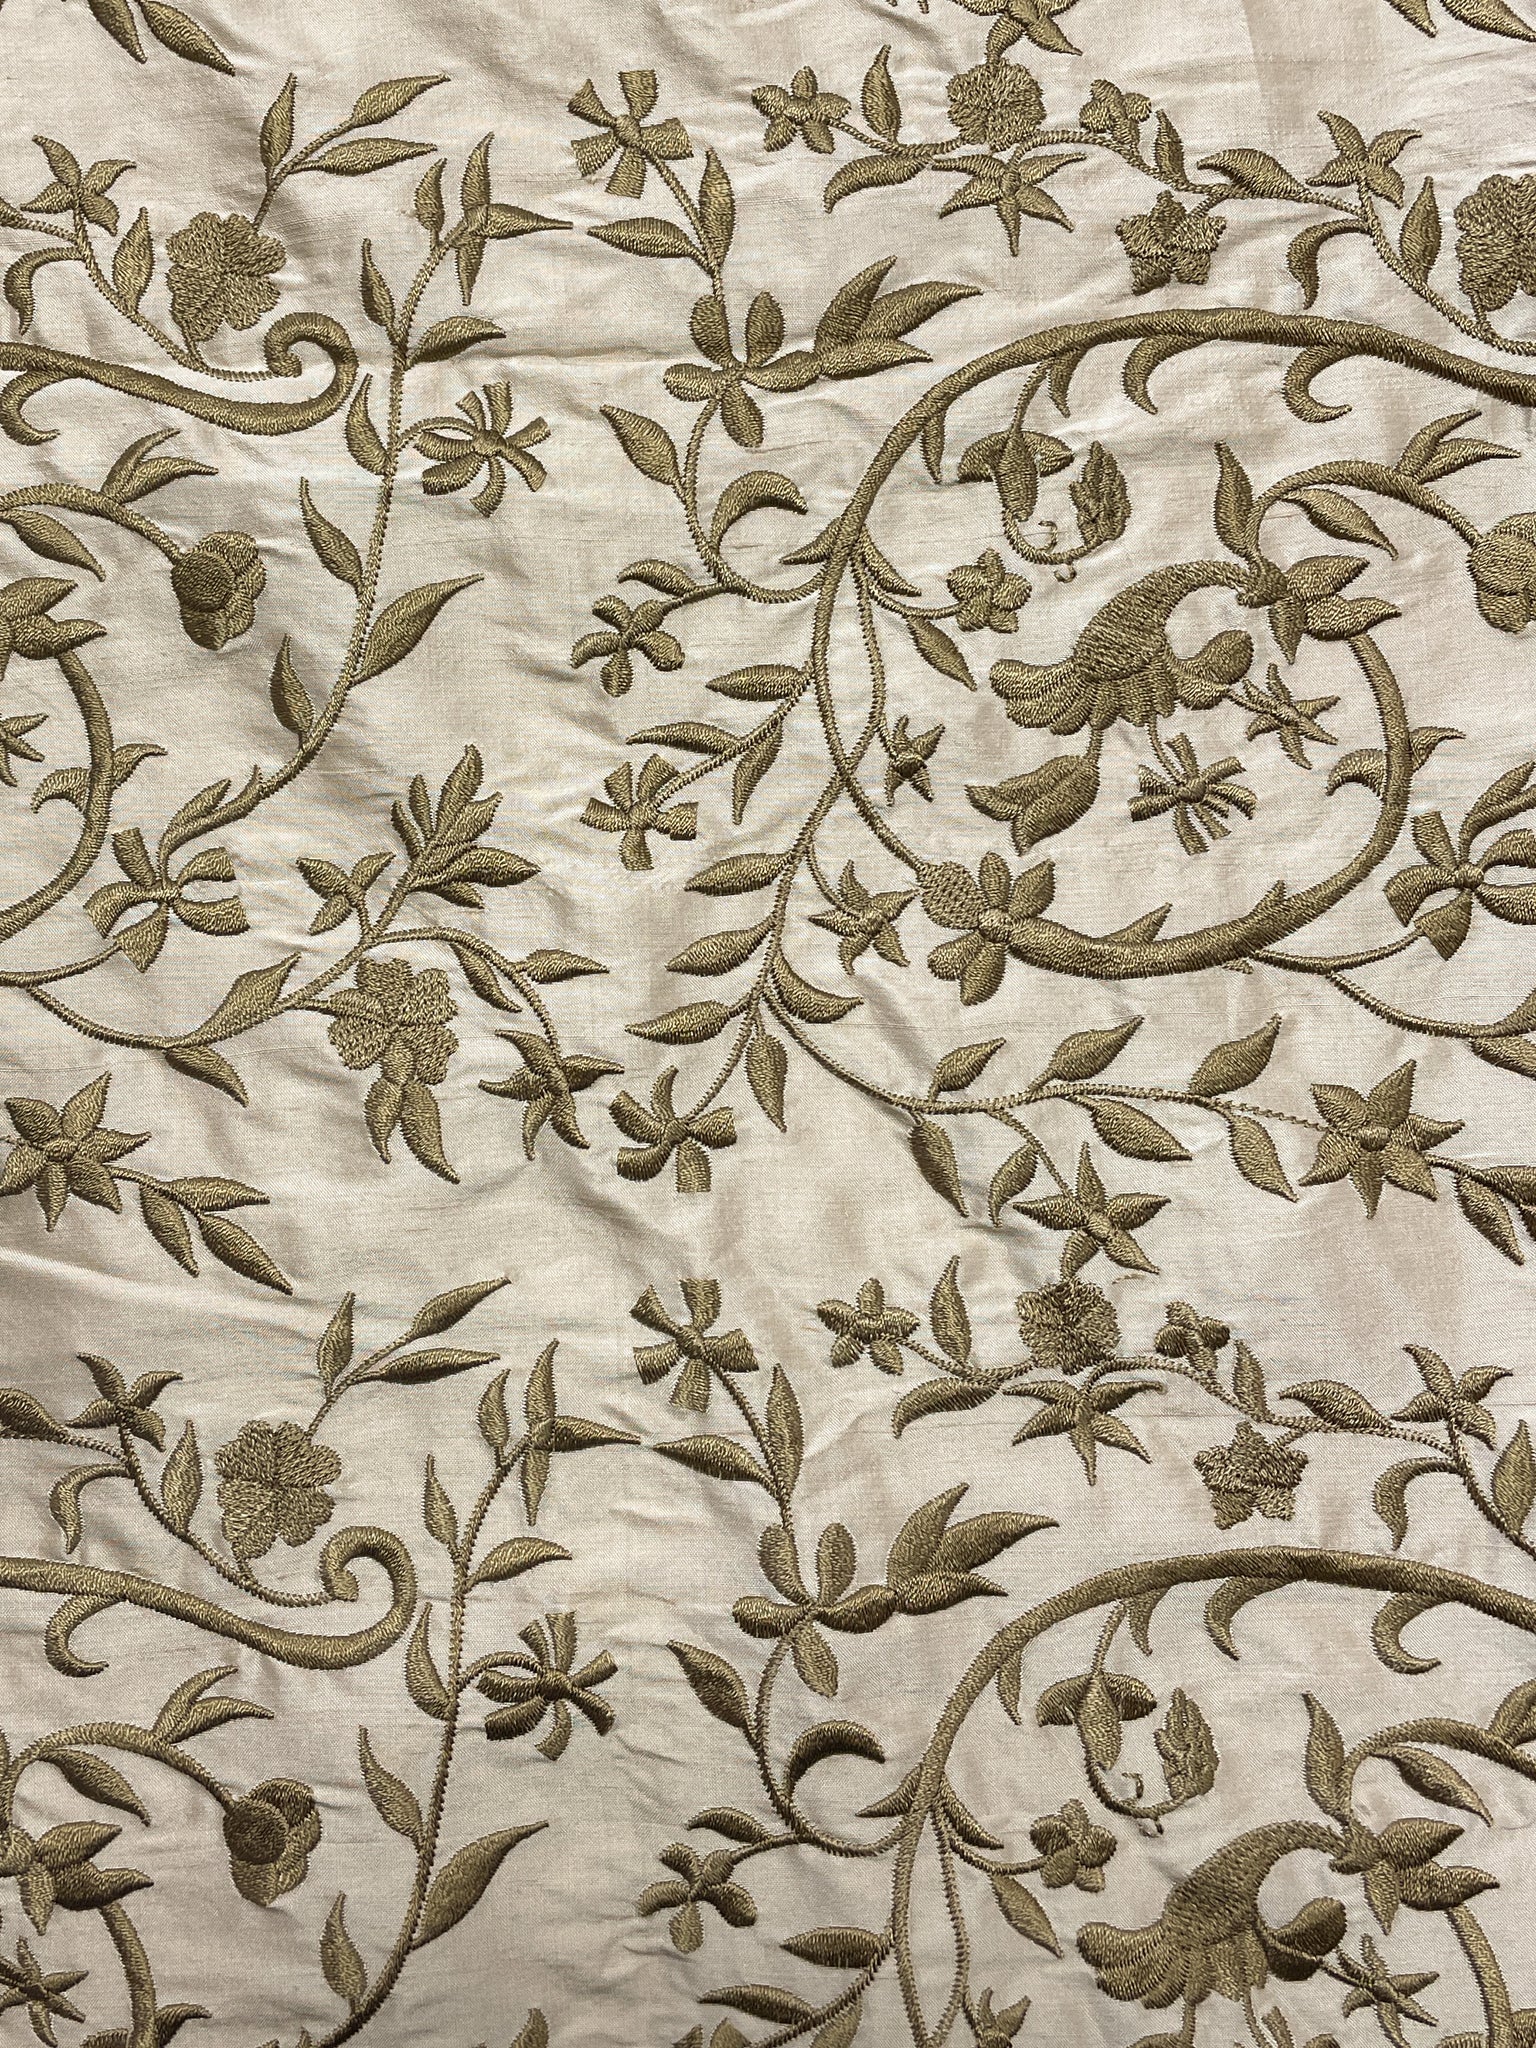 5/8+ YD Silk Embroidered Taffeta Remnant - Beige with Tan